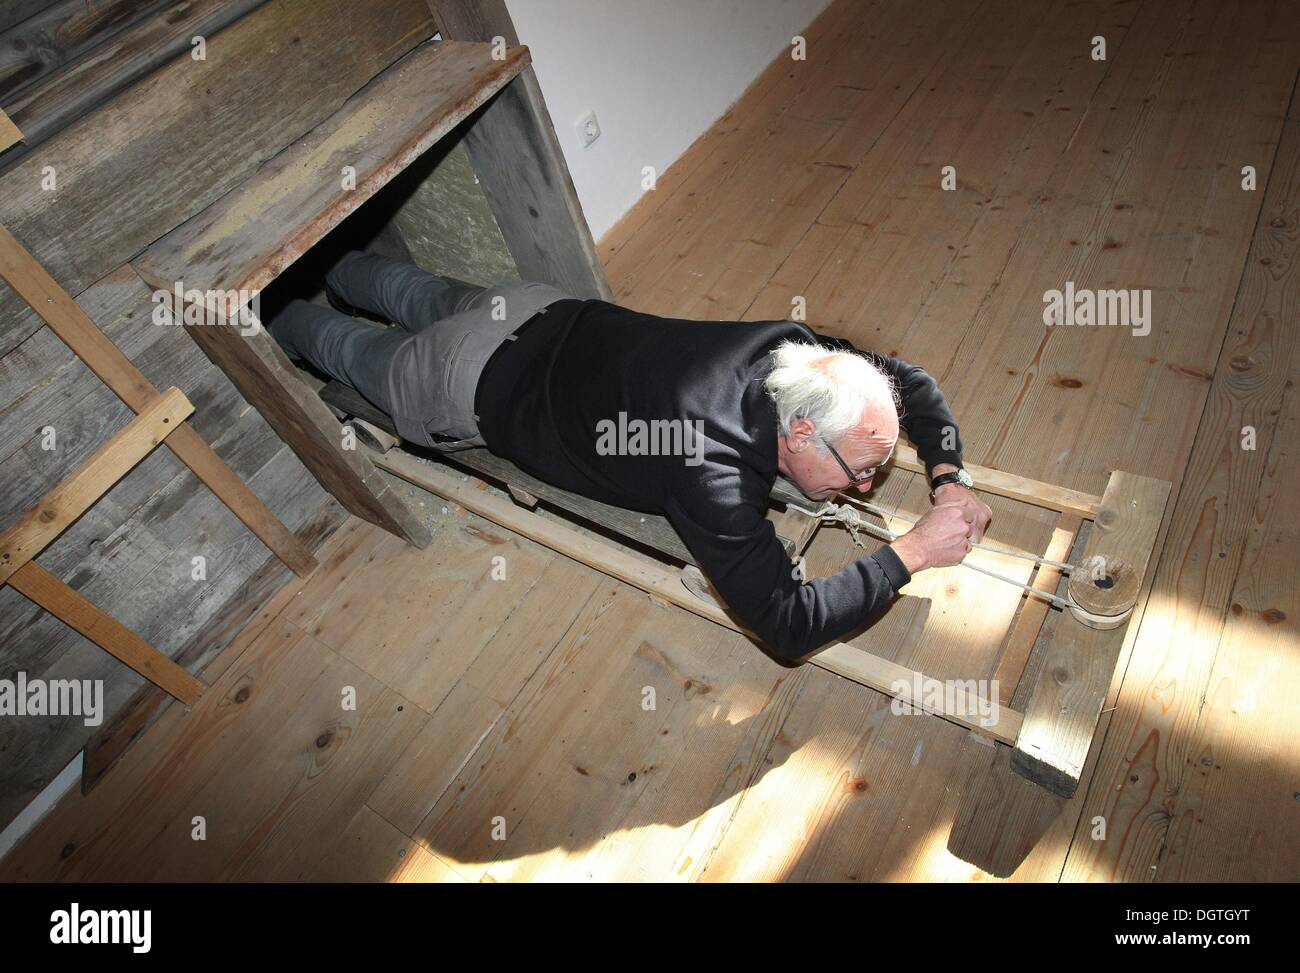 Fuessen, Germany. 17th Oct, 2013. Museum director Thomas Riedmiller pulls himself on a cart through a reconstructed flight tunnel in the Stadtmuseum in Fuessen, Germany, 17 October 2013. A construction of this type was used during the shooting of the film 'The Great Escape' 50 years ago in the Allgau region. Photo: Karl-Josef Hildenbrand/dpa/Alamy Live News Stock Photo